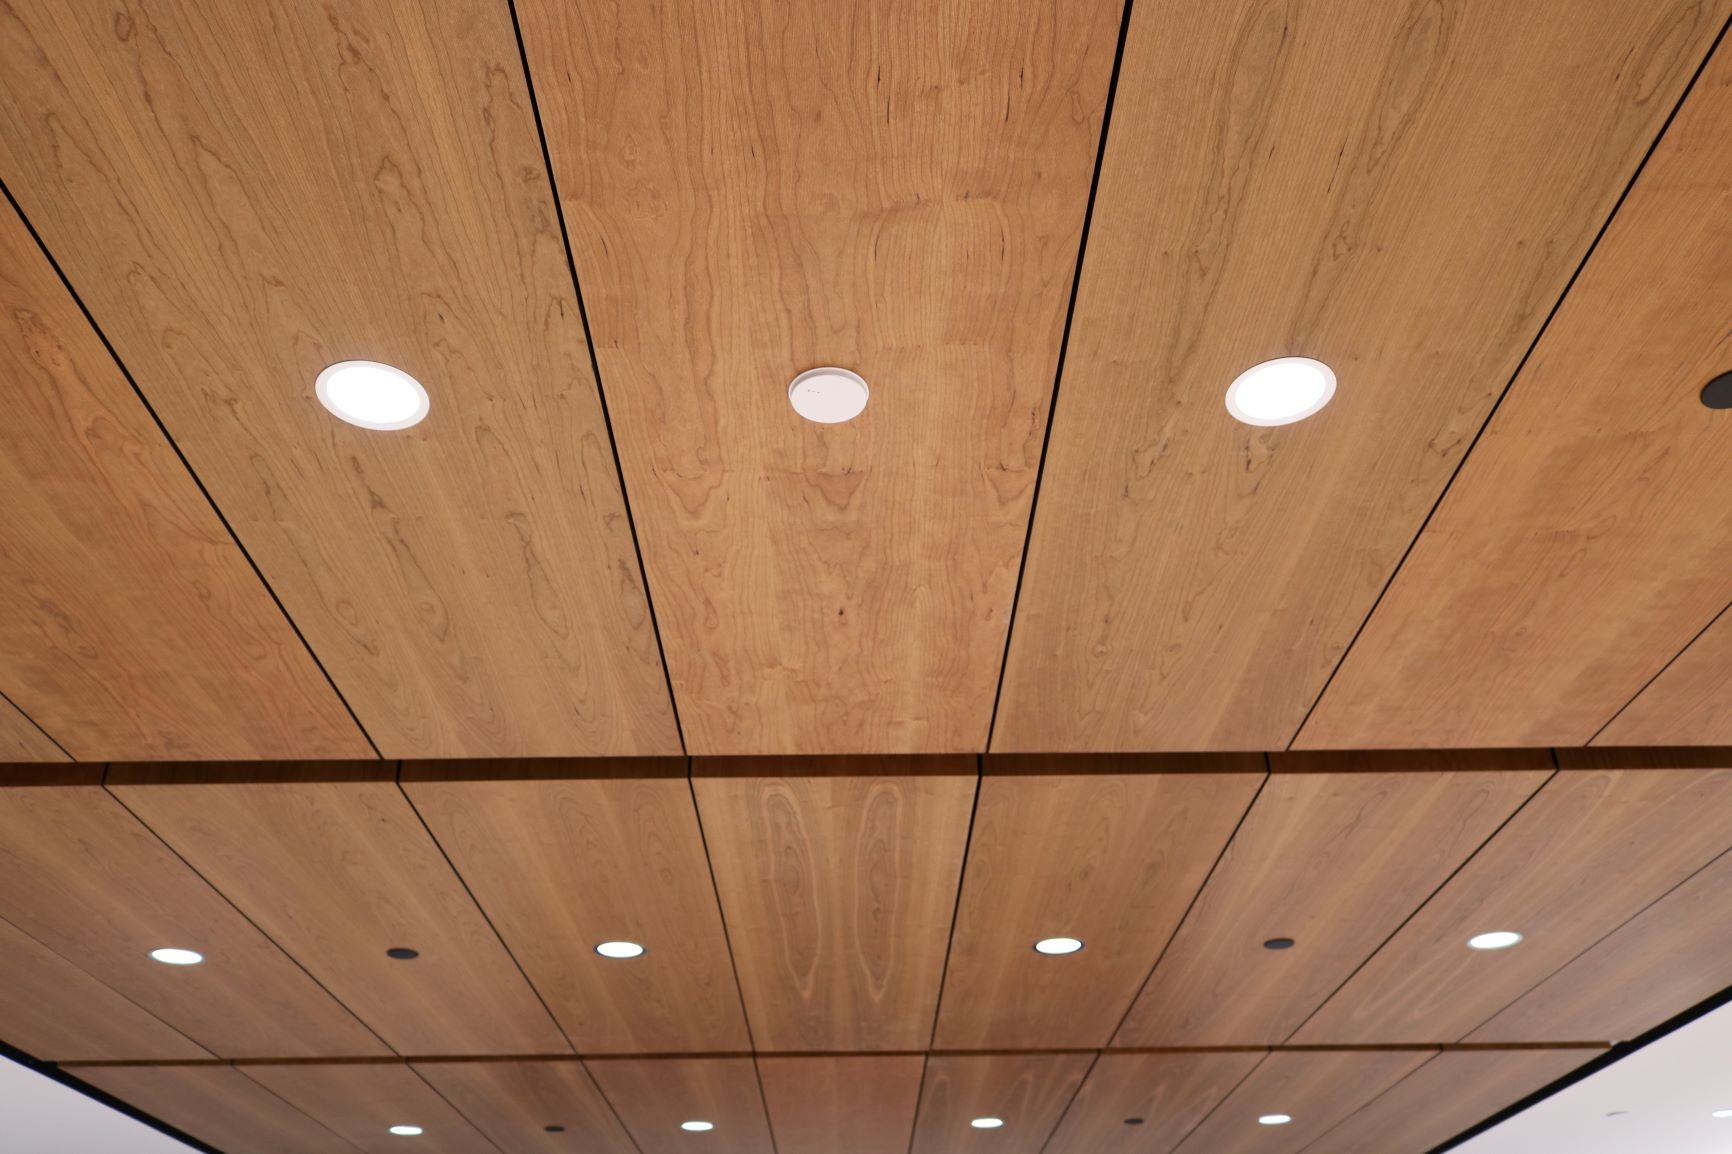 Acoustic perforated wood panels line the ceiling